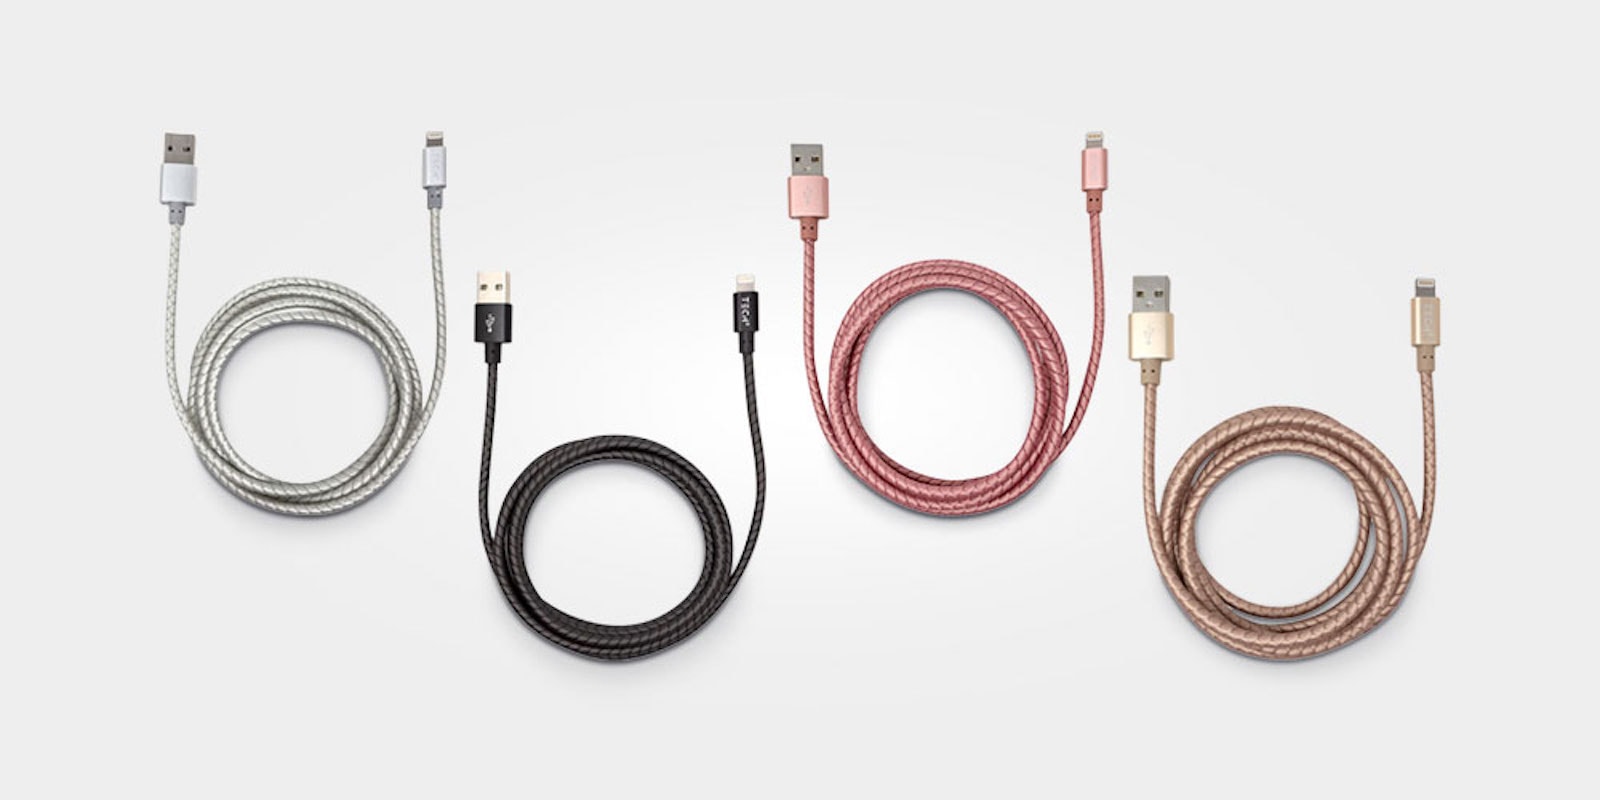 This Lightning cable is built tough, with 5 feet of length for extra flexibility and reach.